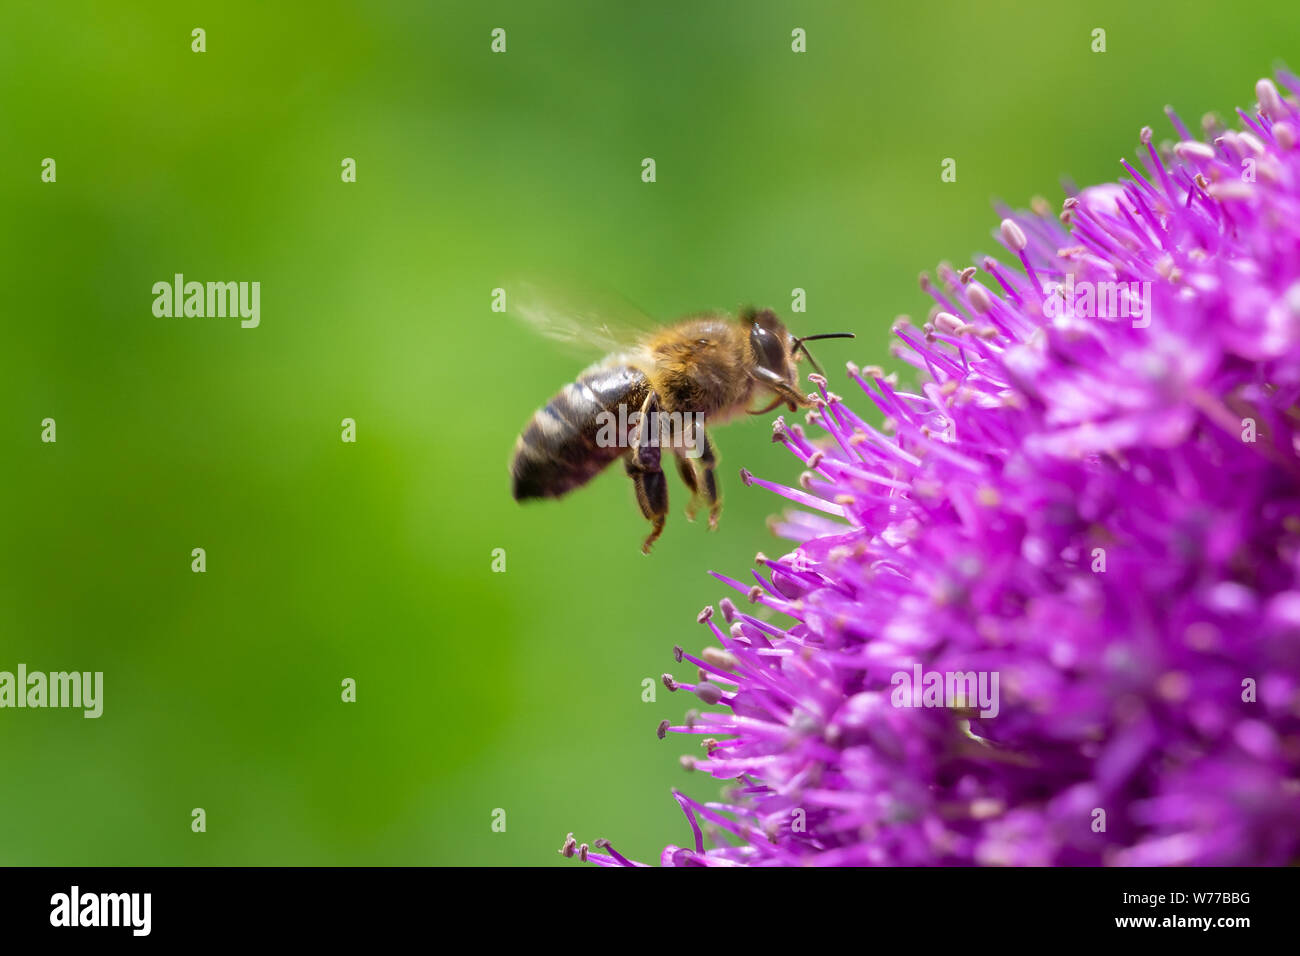 Bee flying gathering pollen or nectar on a purple giant allium flower, Allium Giganteum, with copy space. Stock Photo